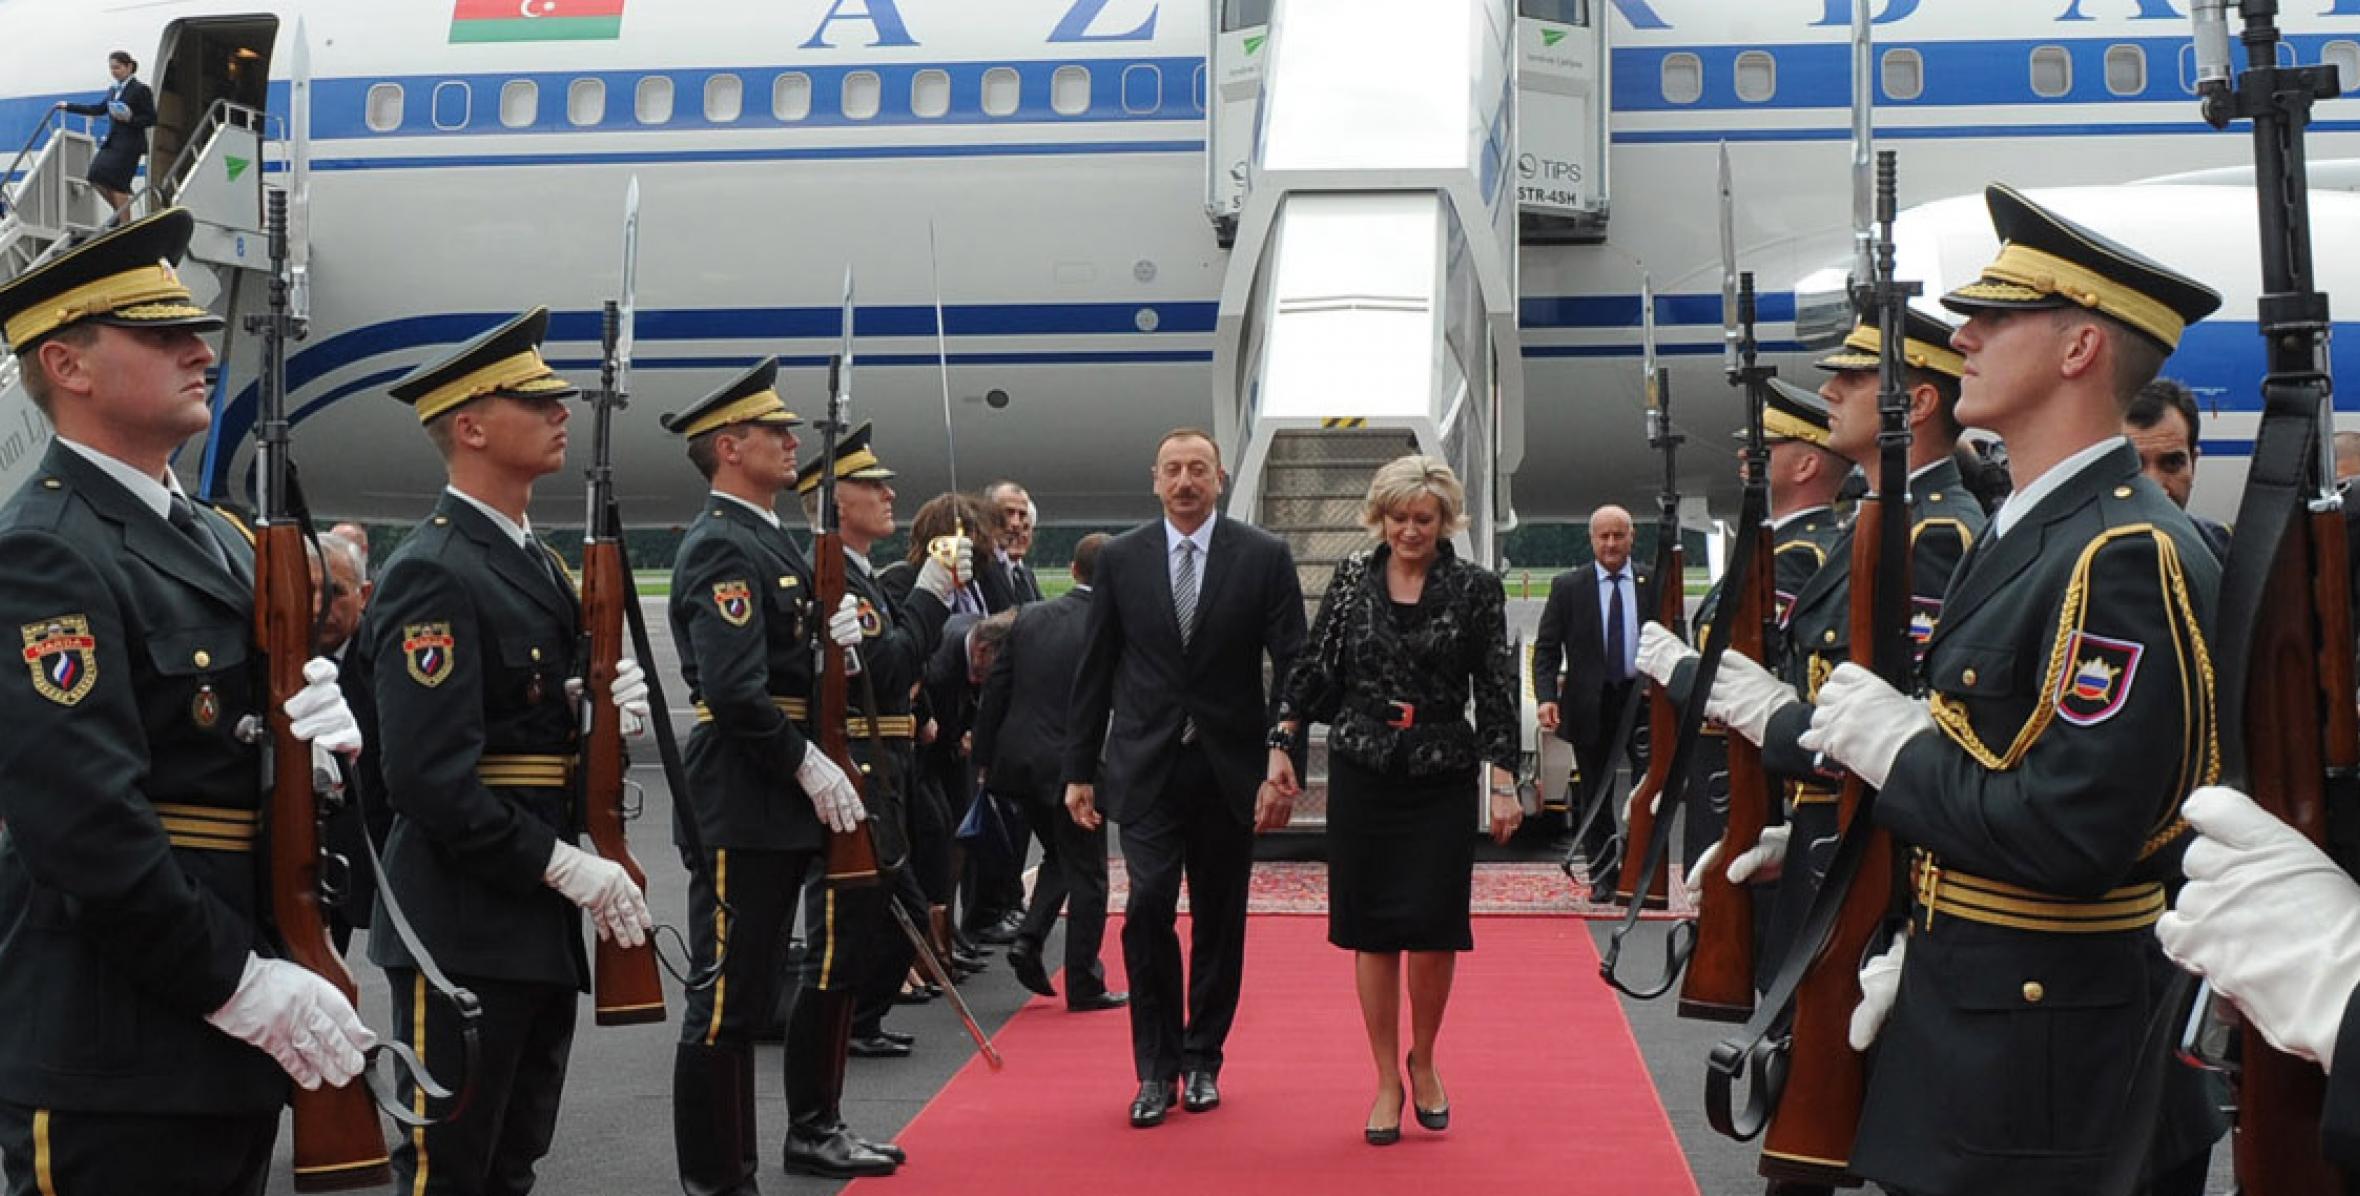 Ilham Aliyev arrived in Slovenia on official visit